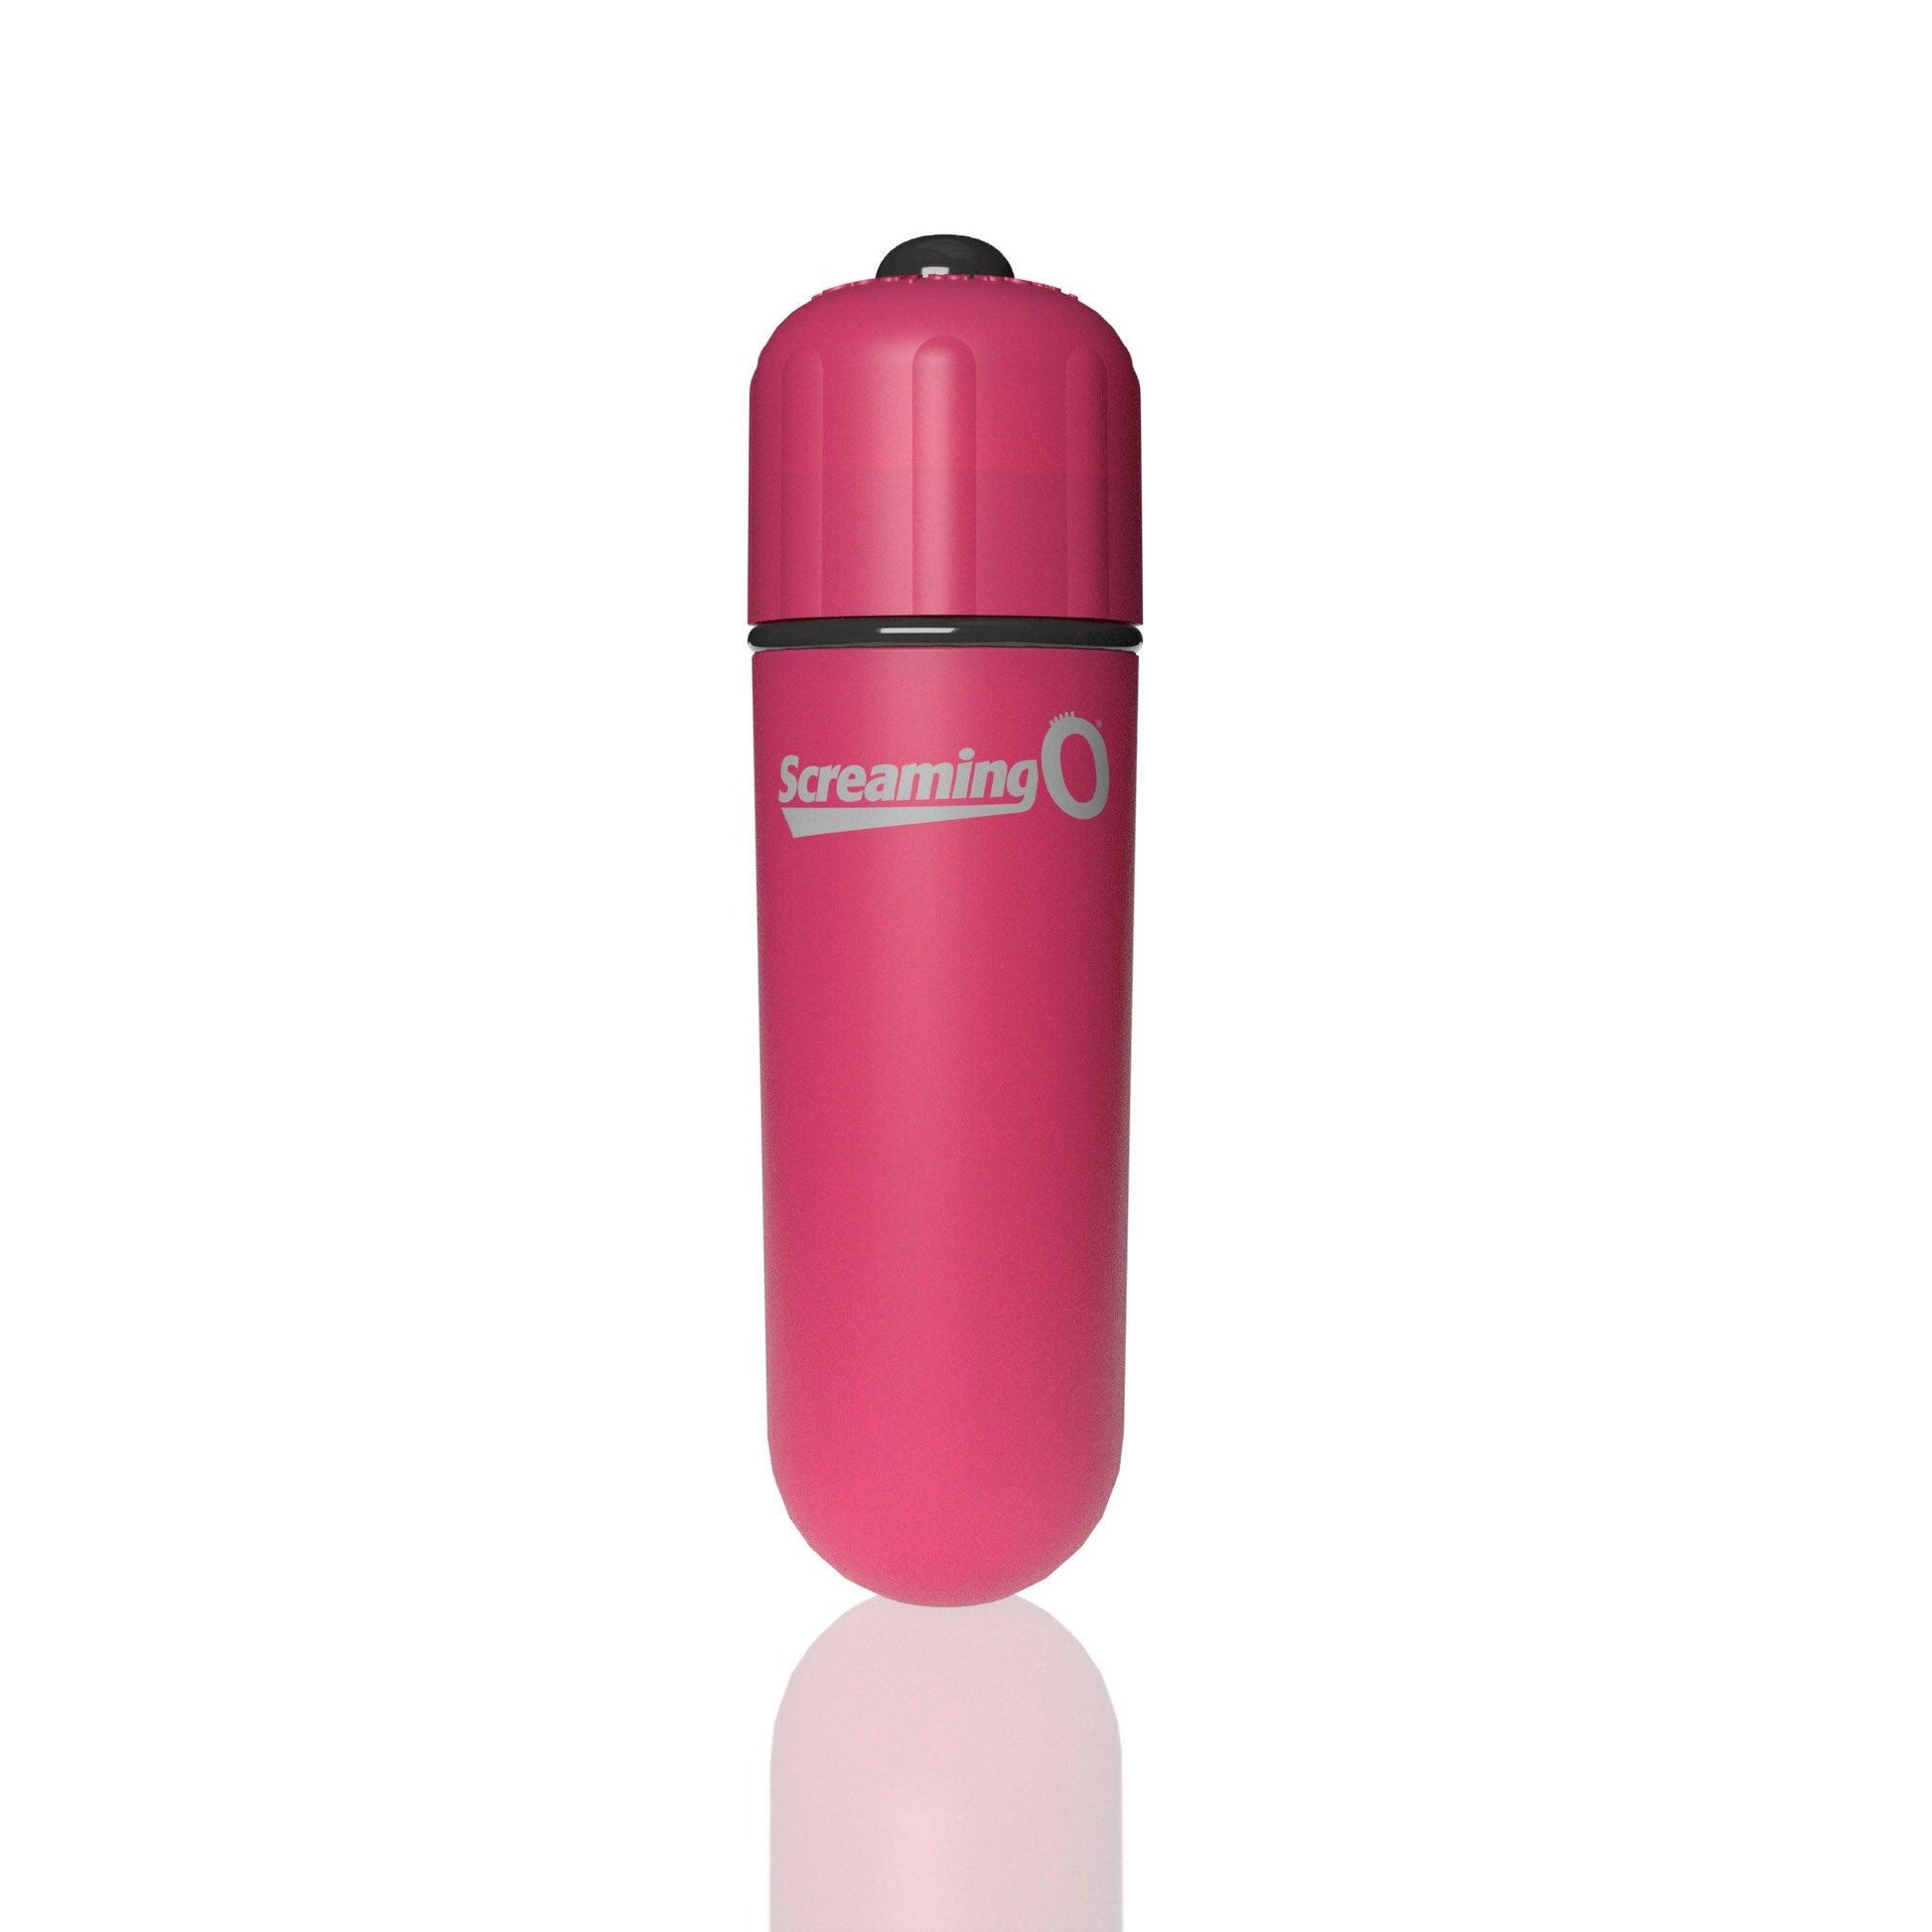 Screaming O 4b - Bullet - Super Powered One Touch Vibrating Bullet - Strawberry - My Sex Toy Hub